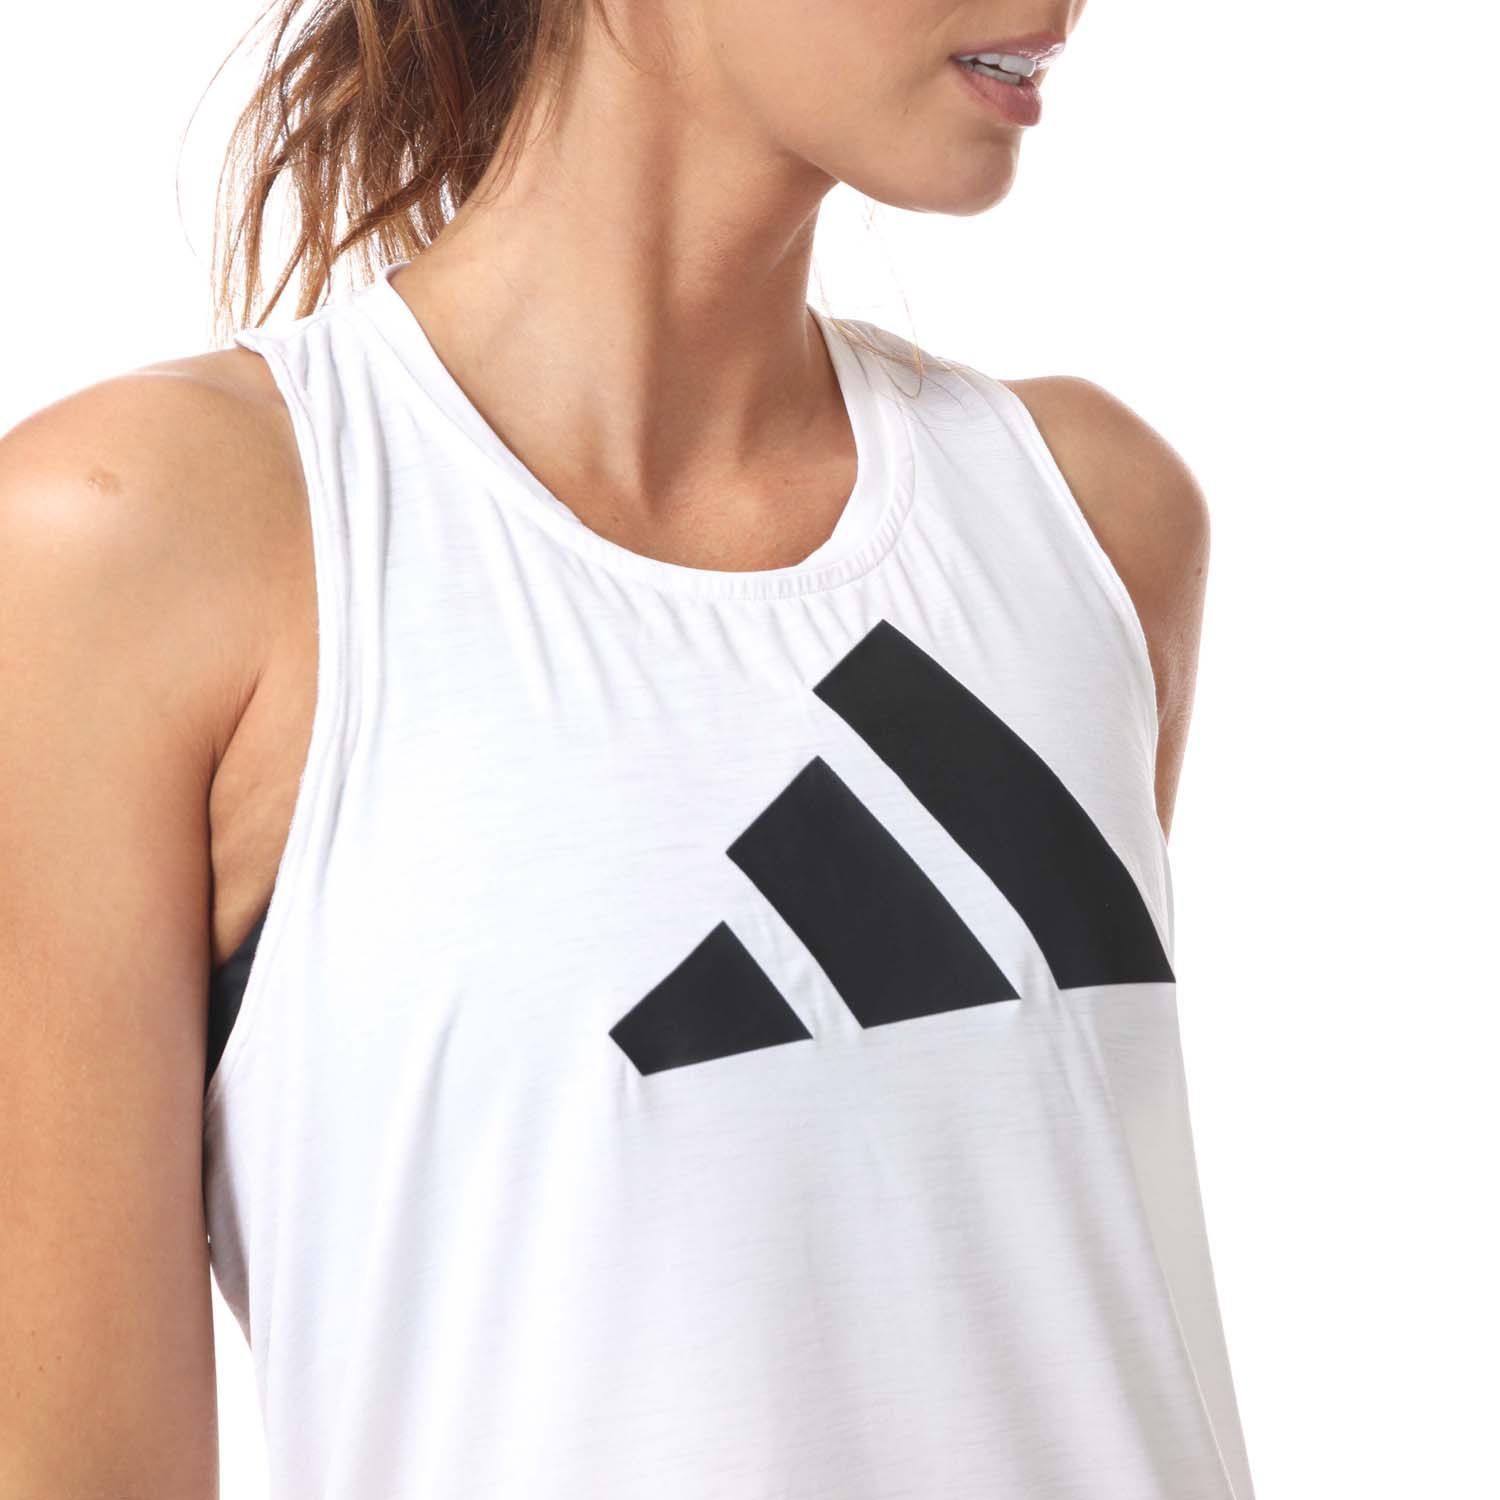 Womens adidas 3- Stripes Logo Tank Top in white black.- Crewneck.- Sleeveless.- Racerback with cutout.- Moisture absorbing.- Scoop hem.- Regular fit.- Main Material: 81% Polyester (Recycled)  19% Elastane.- Ref: GR8054